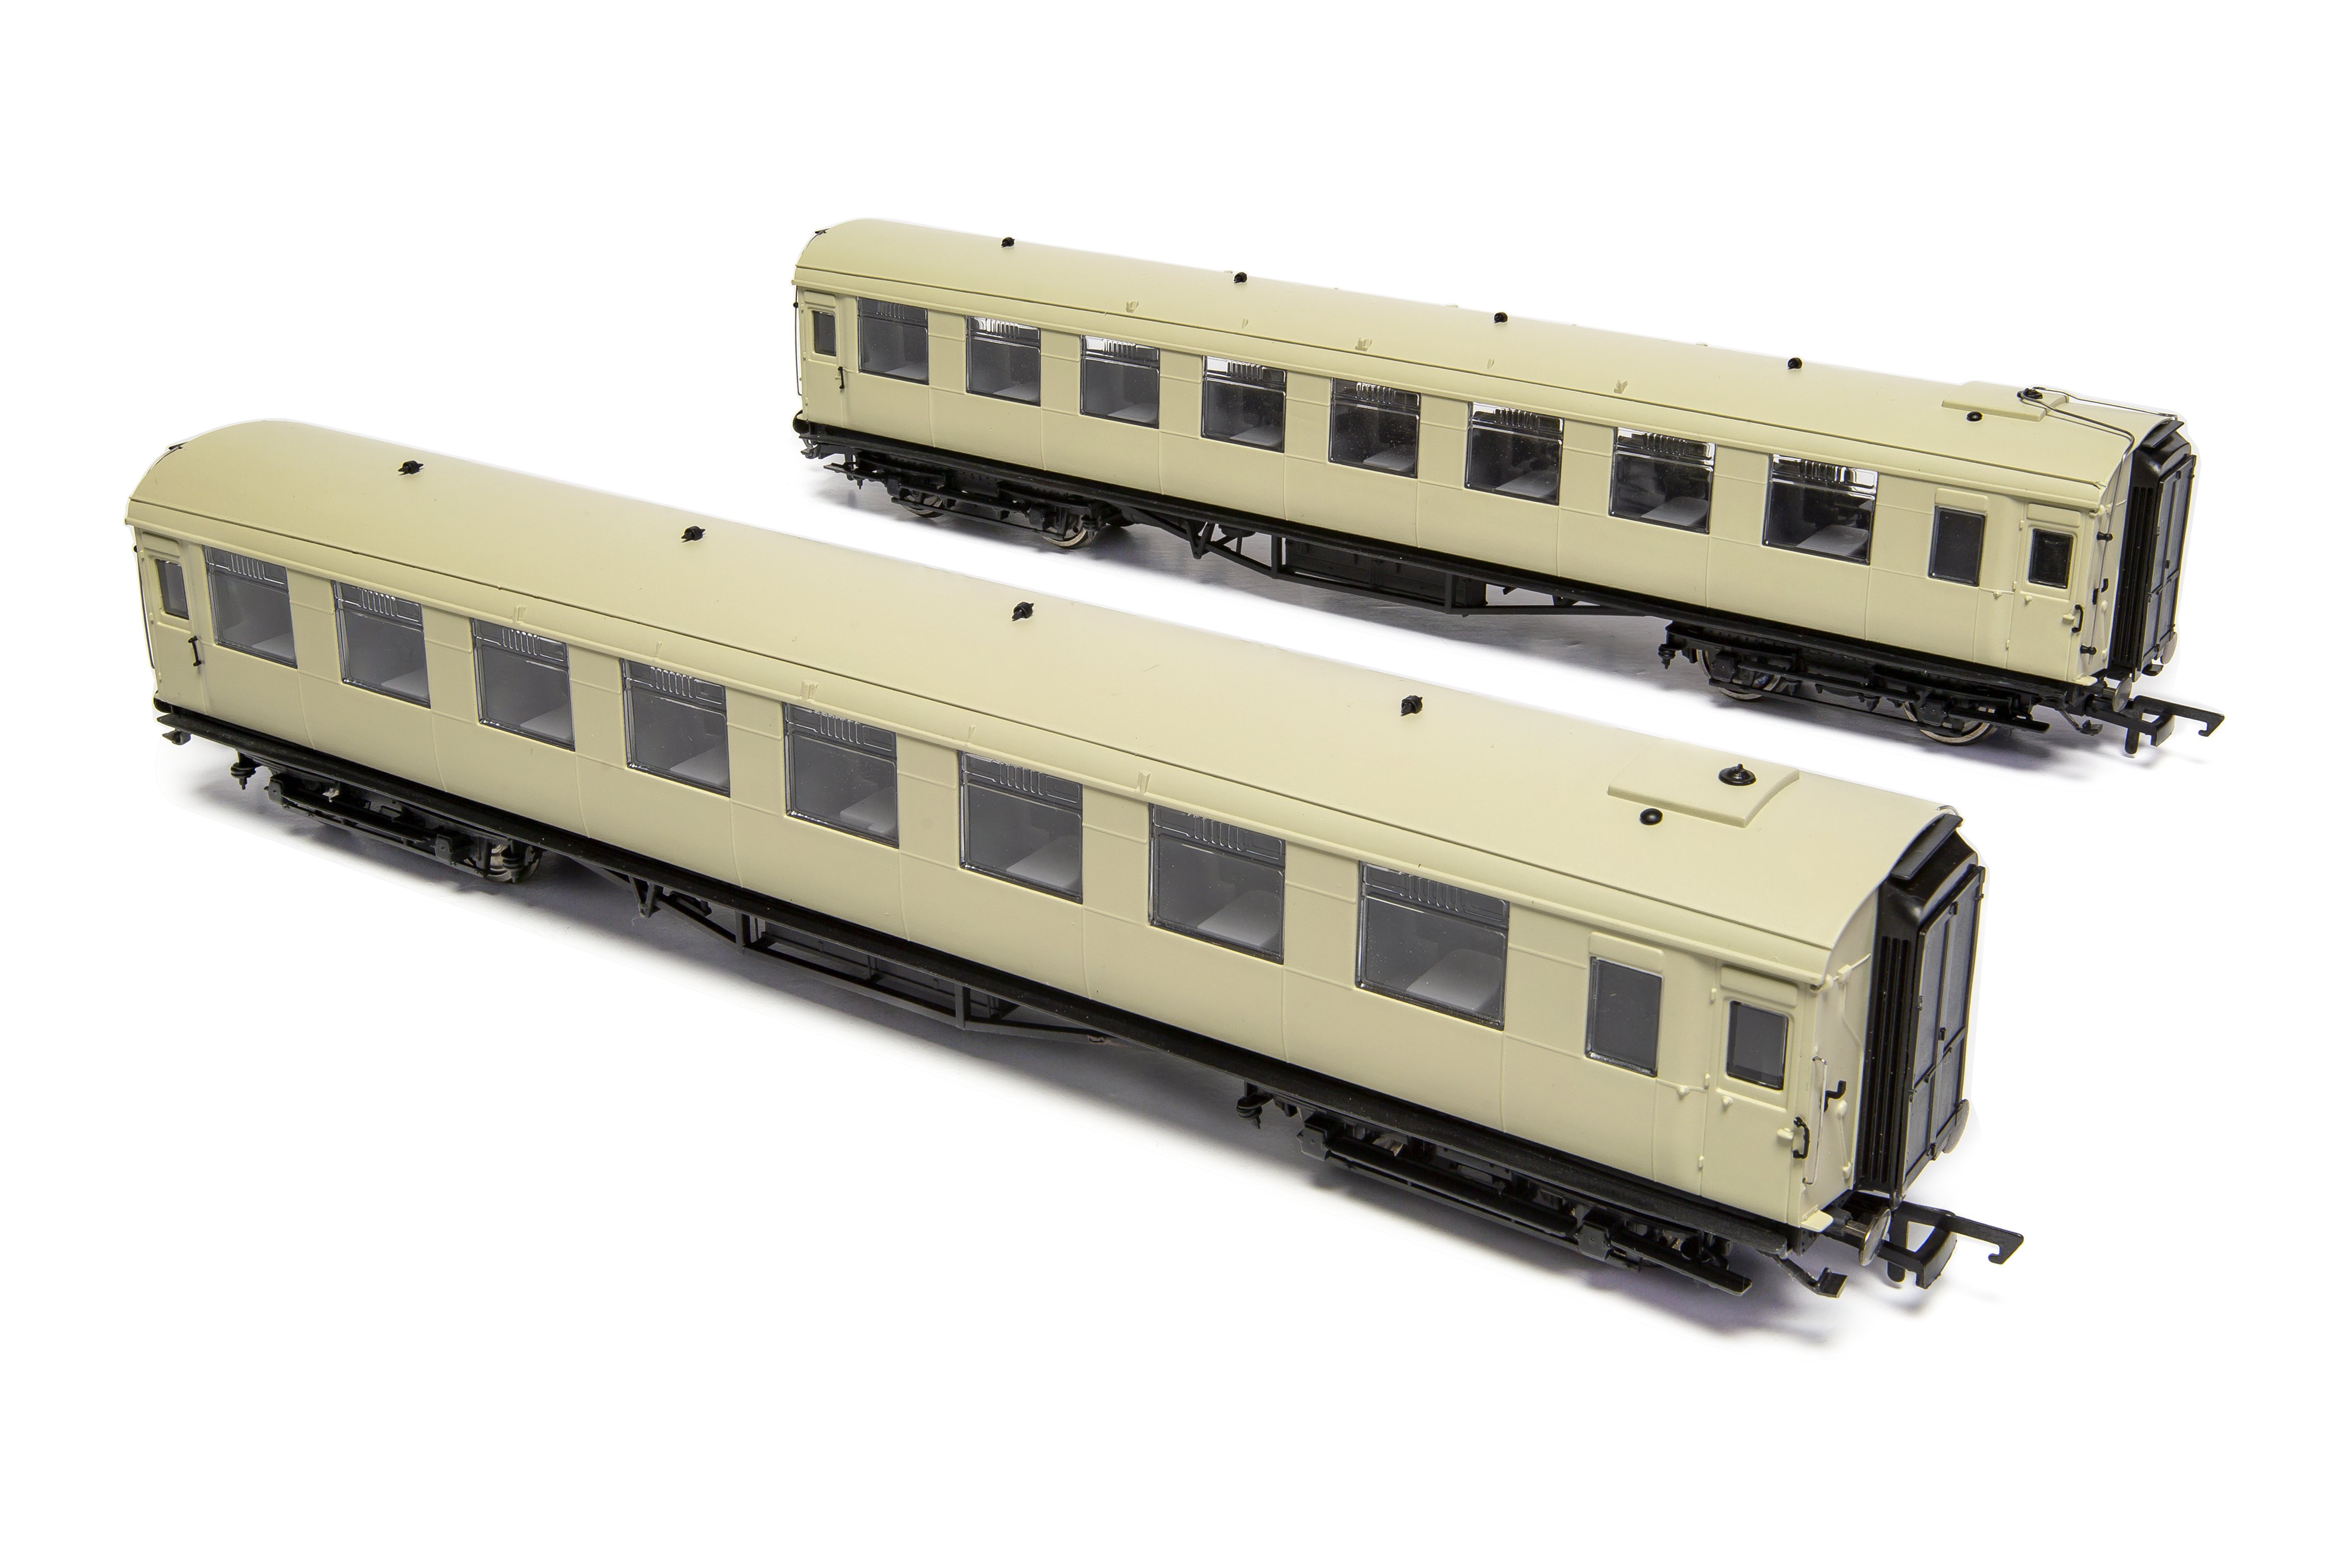 hm173_hornby_maunsell_diners_lr1